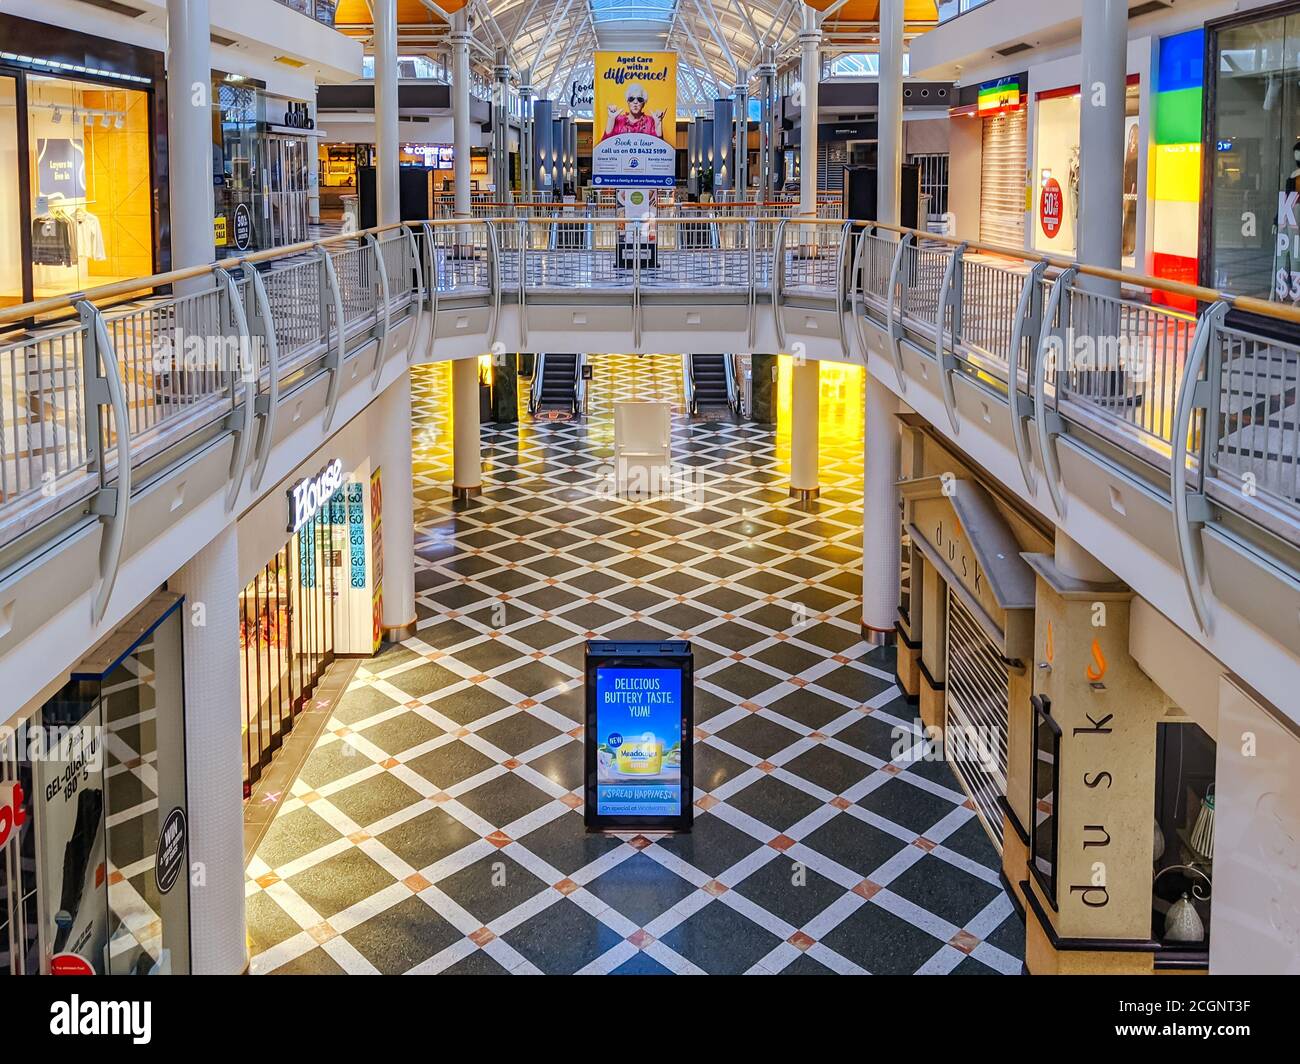 Melbourne Shopping Centre During Coronavirus Pandemic and Stage 4 Lockdown Stock Photo